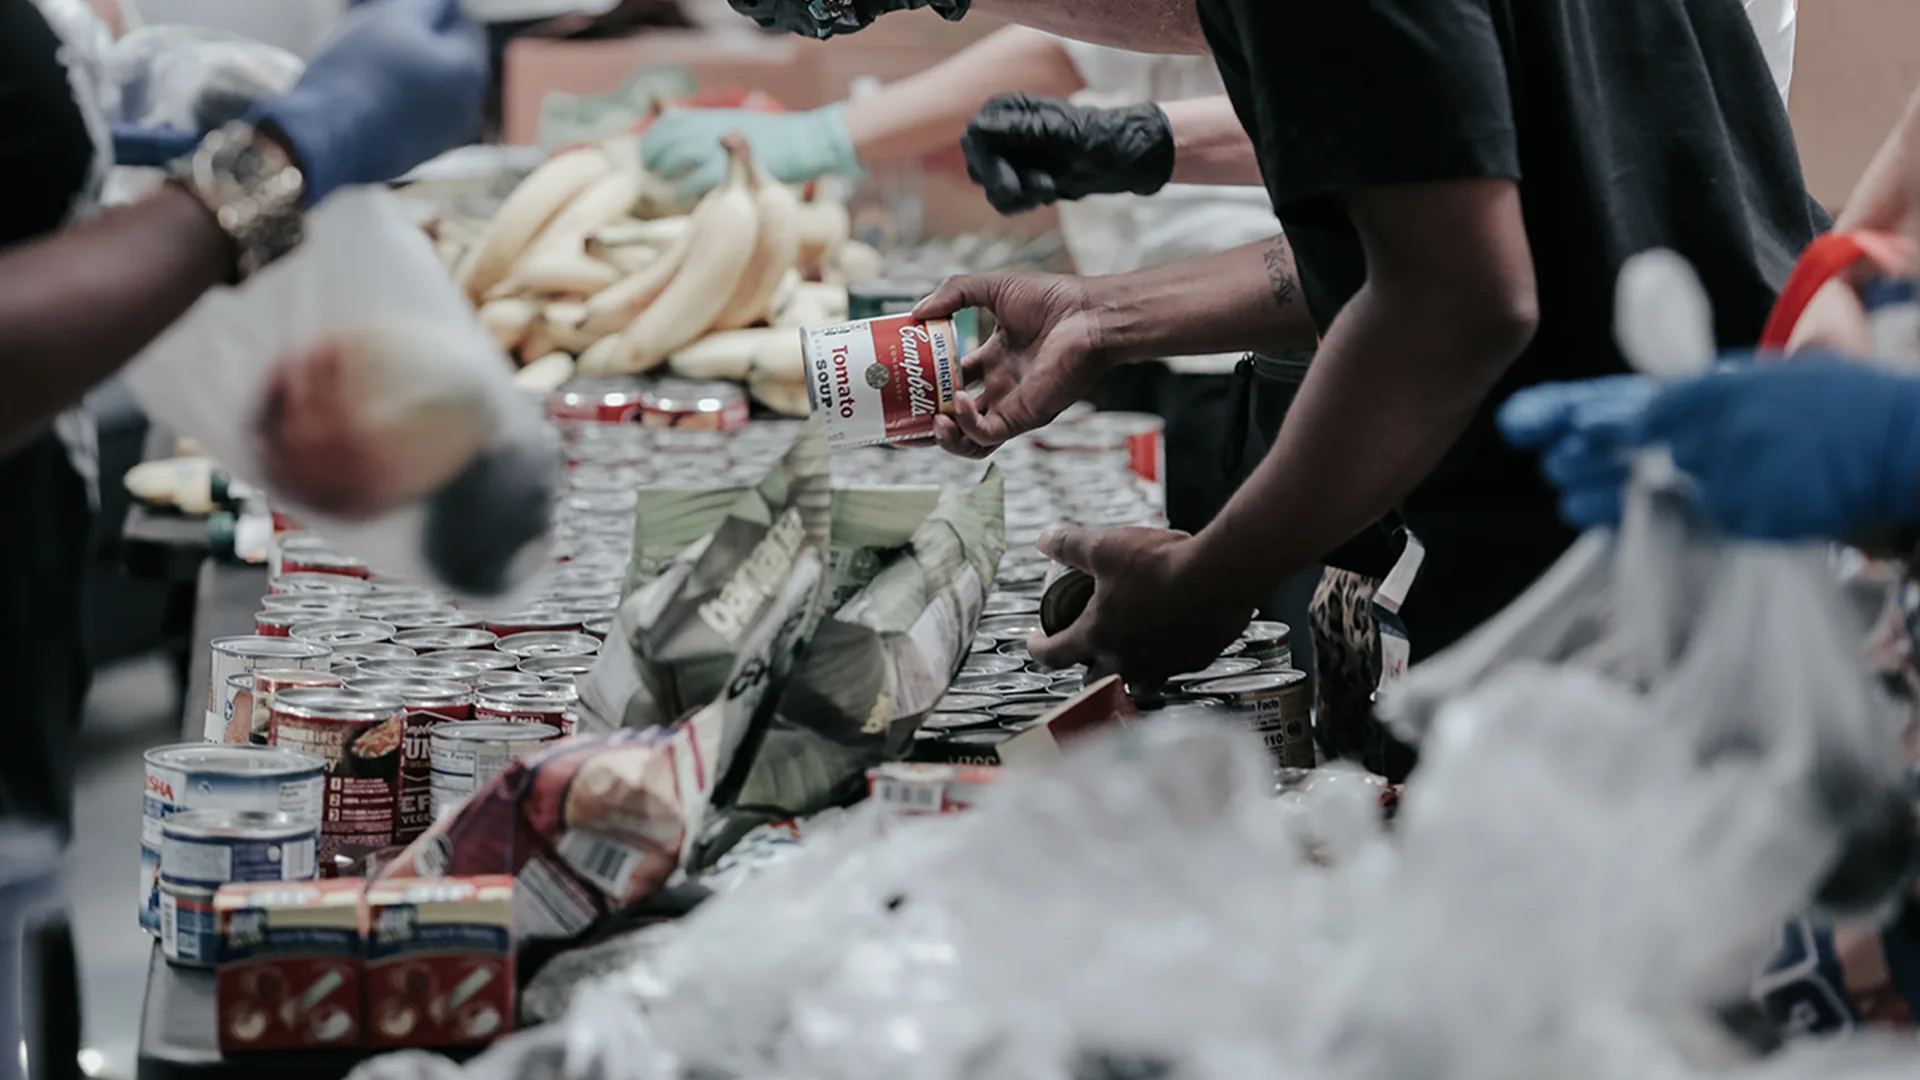 People giving out food to those in need at a food bank